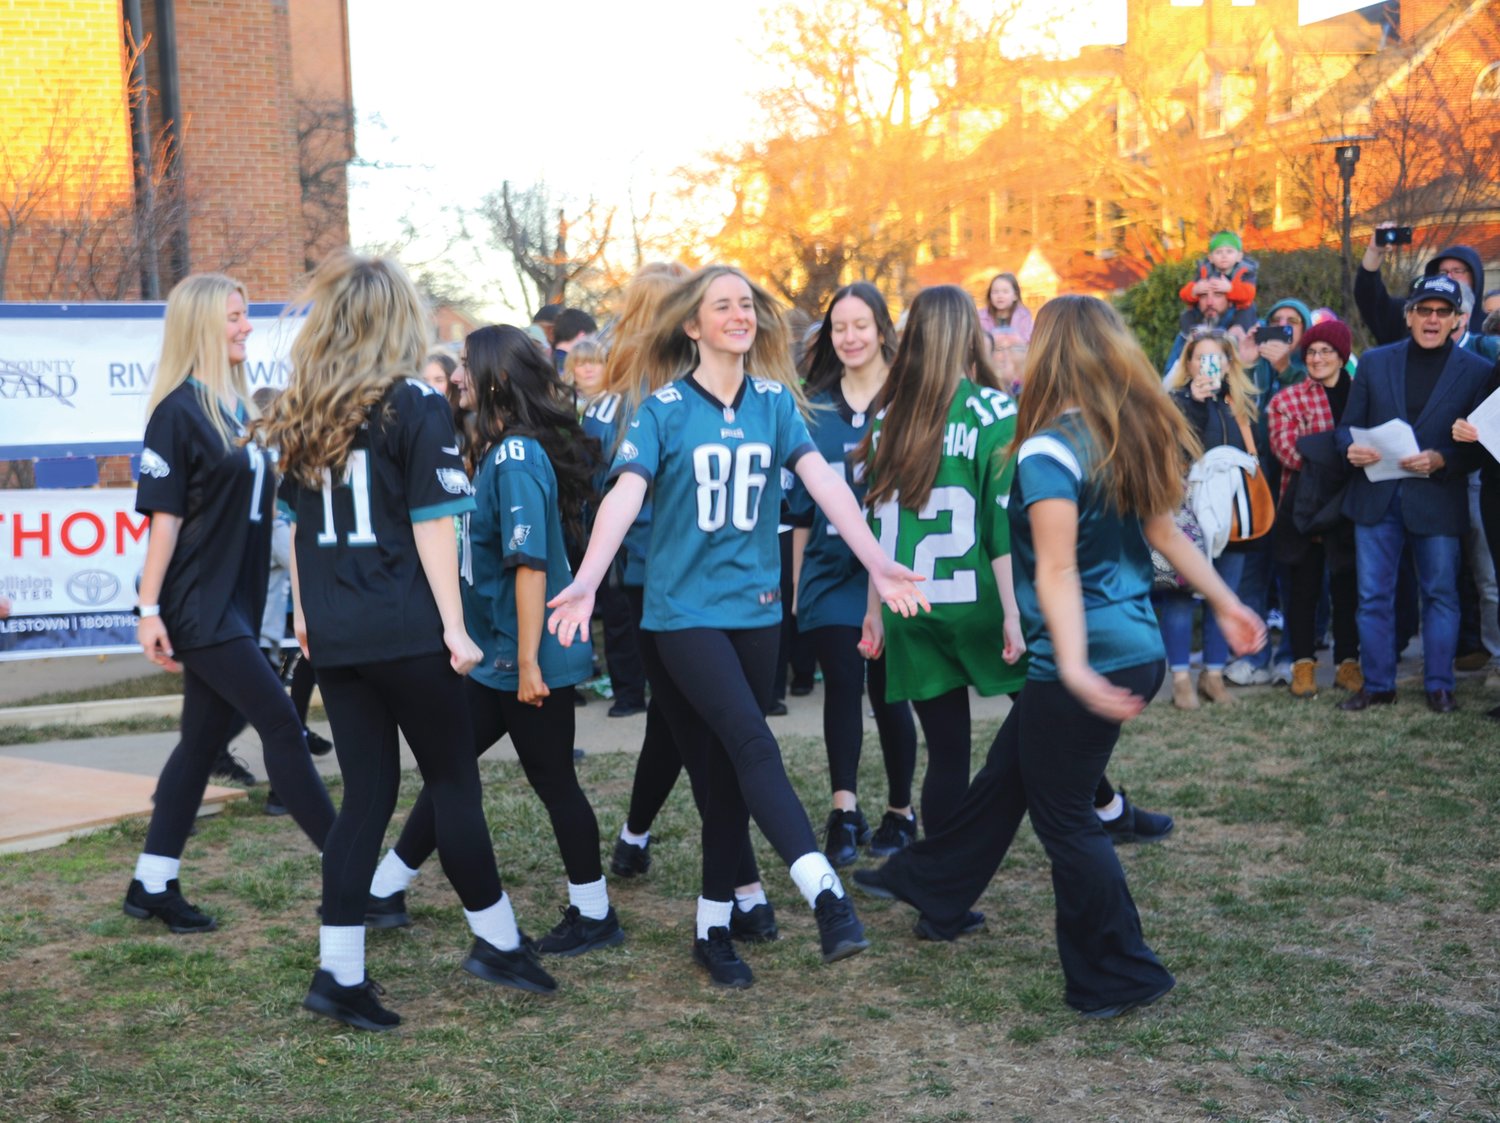 Members of the Fitzpatrick School of Irish Dance pay tribute to the Philadelphia Eagles Friday night at the Herald’s “Bucks County Loves the Birds” pep rally on the lawn of the old county courthouse in Doylestown.